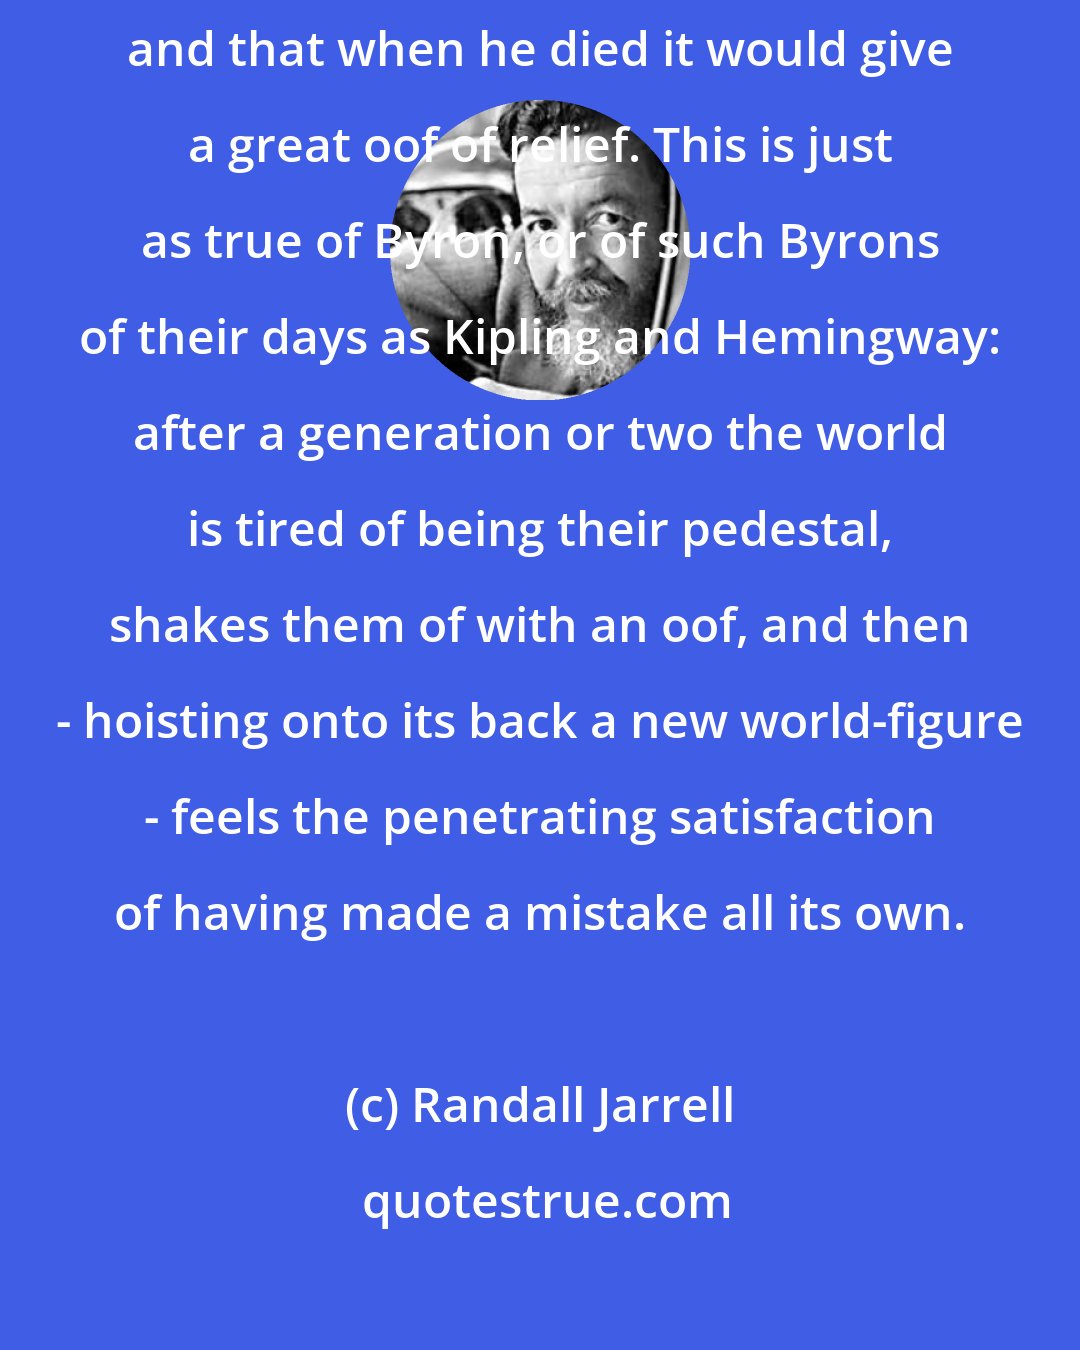 Randall Jarrell: An intelligent man said that the world felt Napoleon as a weight, and that when he died it would give a great oof of relief. This is just as true of Byron, or of such Byrons of their days as Kipling and Hemingway: after a generation or two the world is tired of being their pedestal, shakes them of with an oof, and then - hoisting onto its back a new world-figure - feels the penetrating satisfaction of having made a mistake all its own.